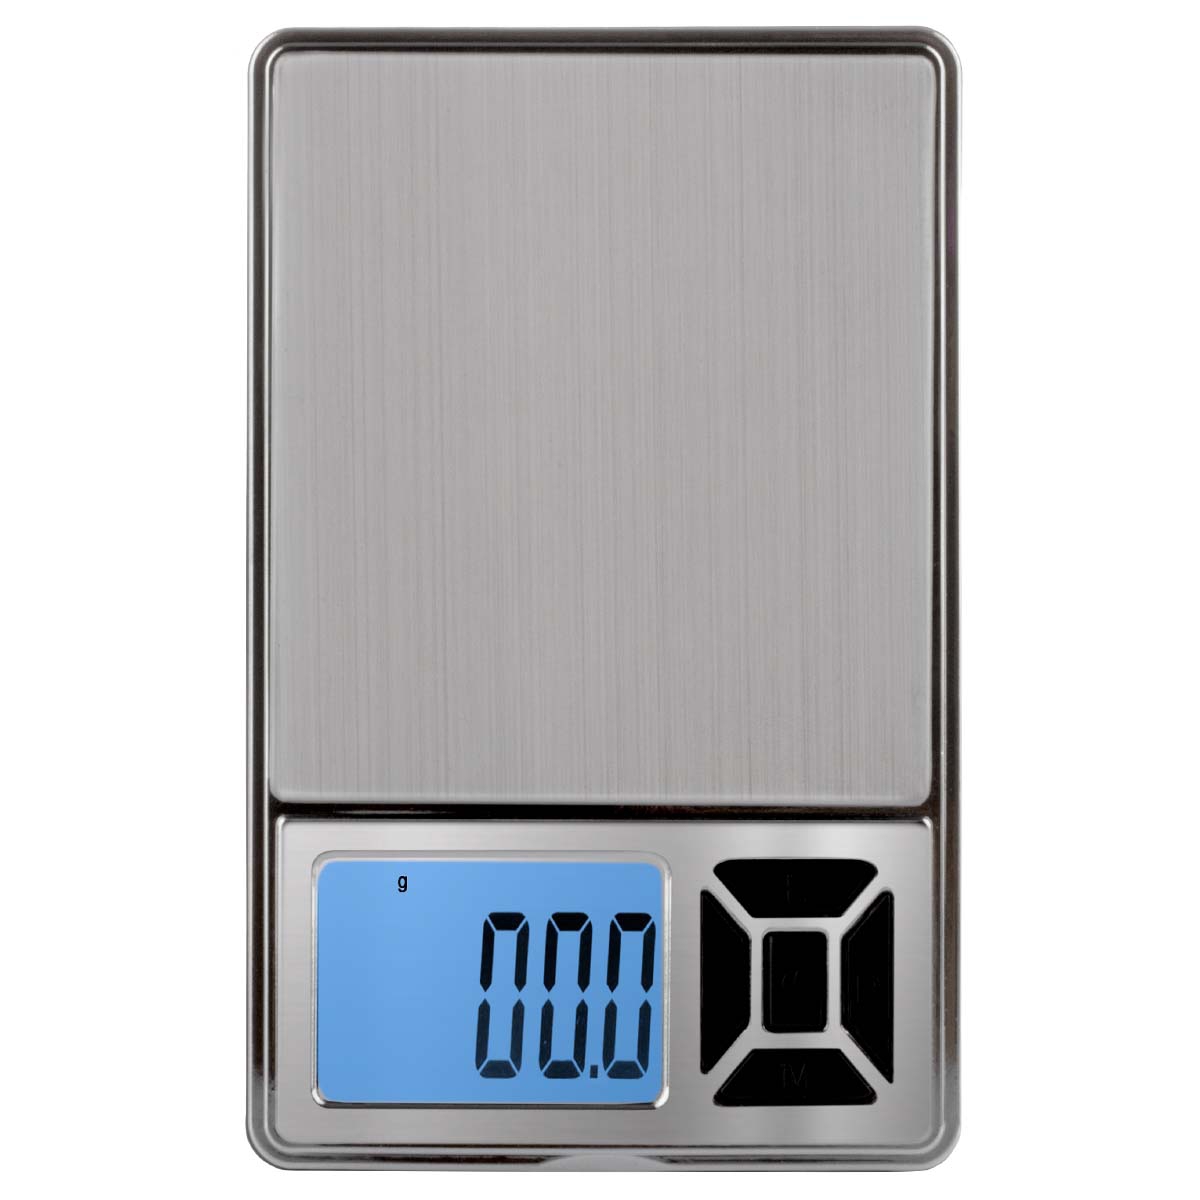 1000g x 0.1g Pocket Digital Jewelry Gold Coin Gram Balance Weight Scale Scales 